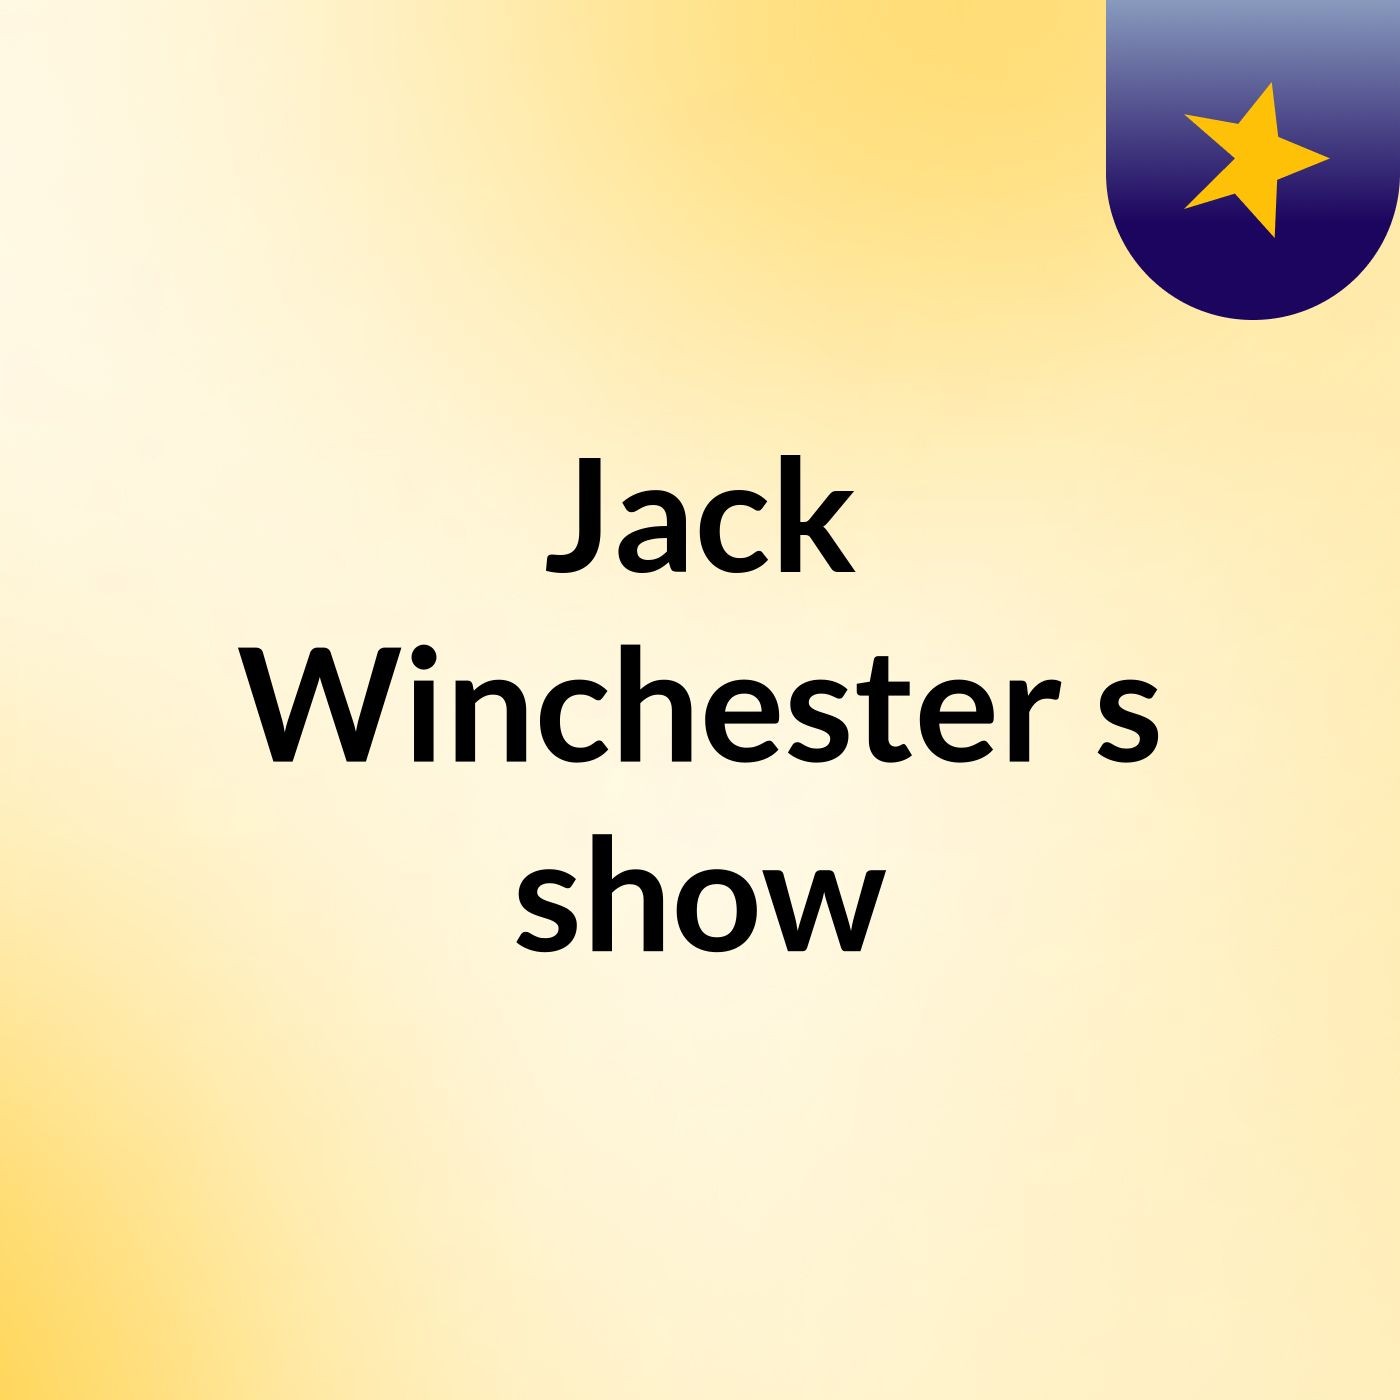 Jack Winchester's show